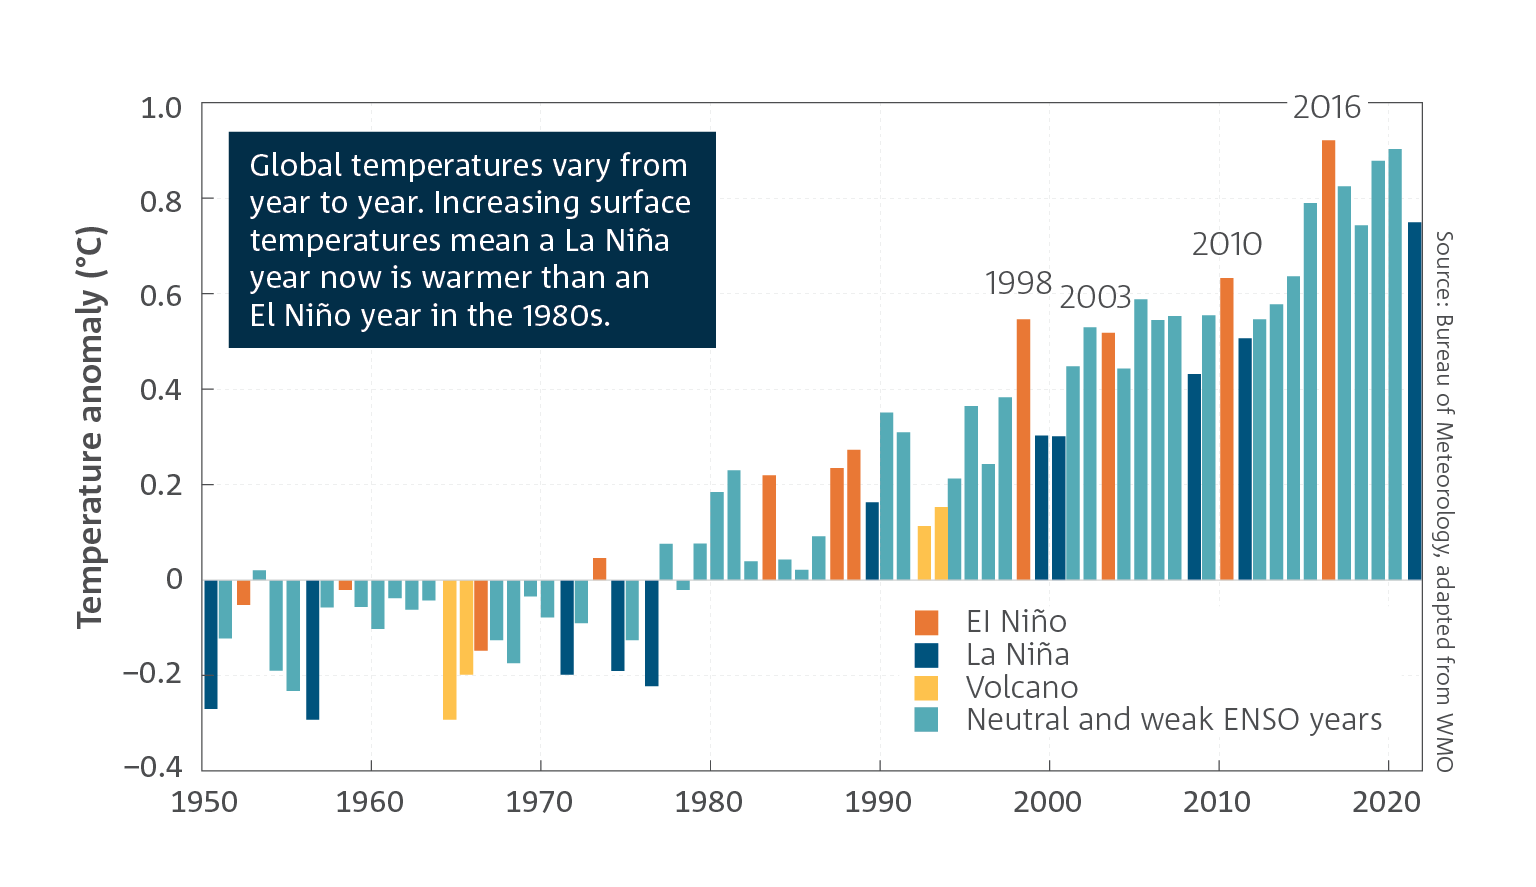 A graph showing global temperature changes over the past 70 years